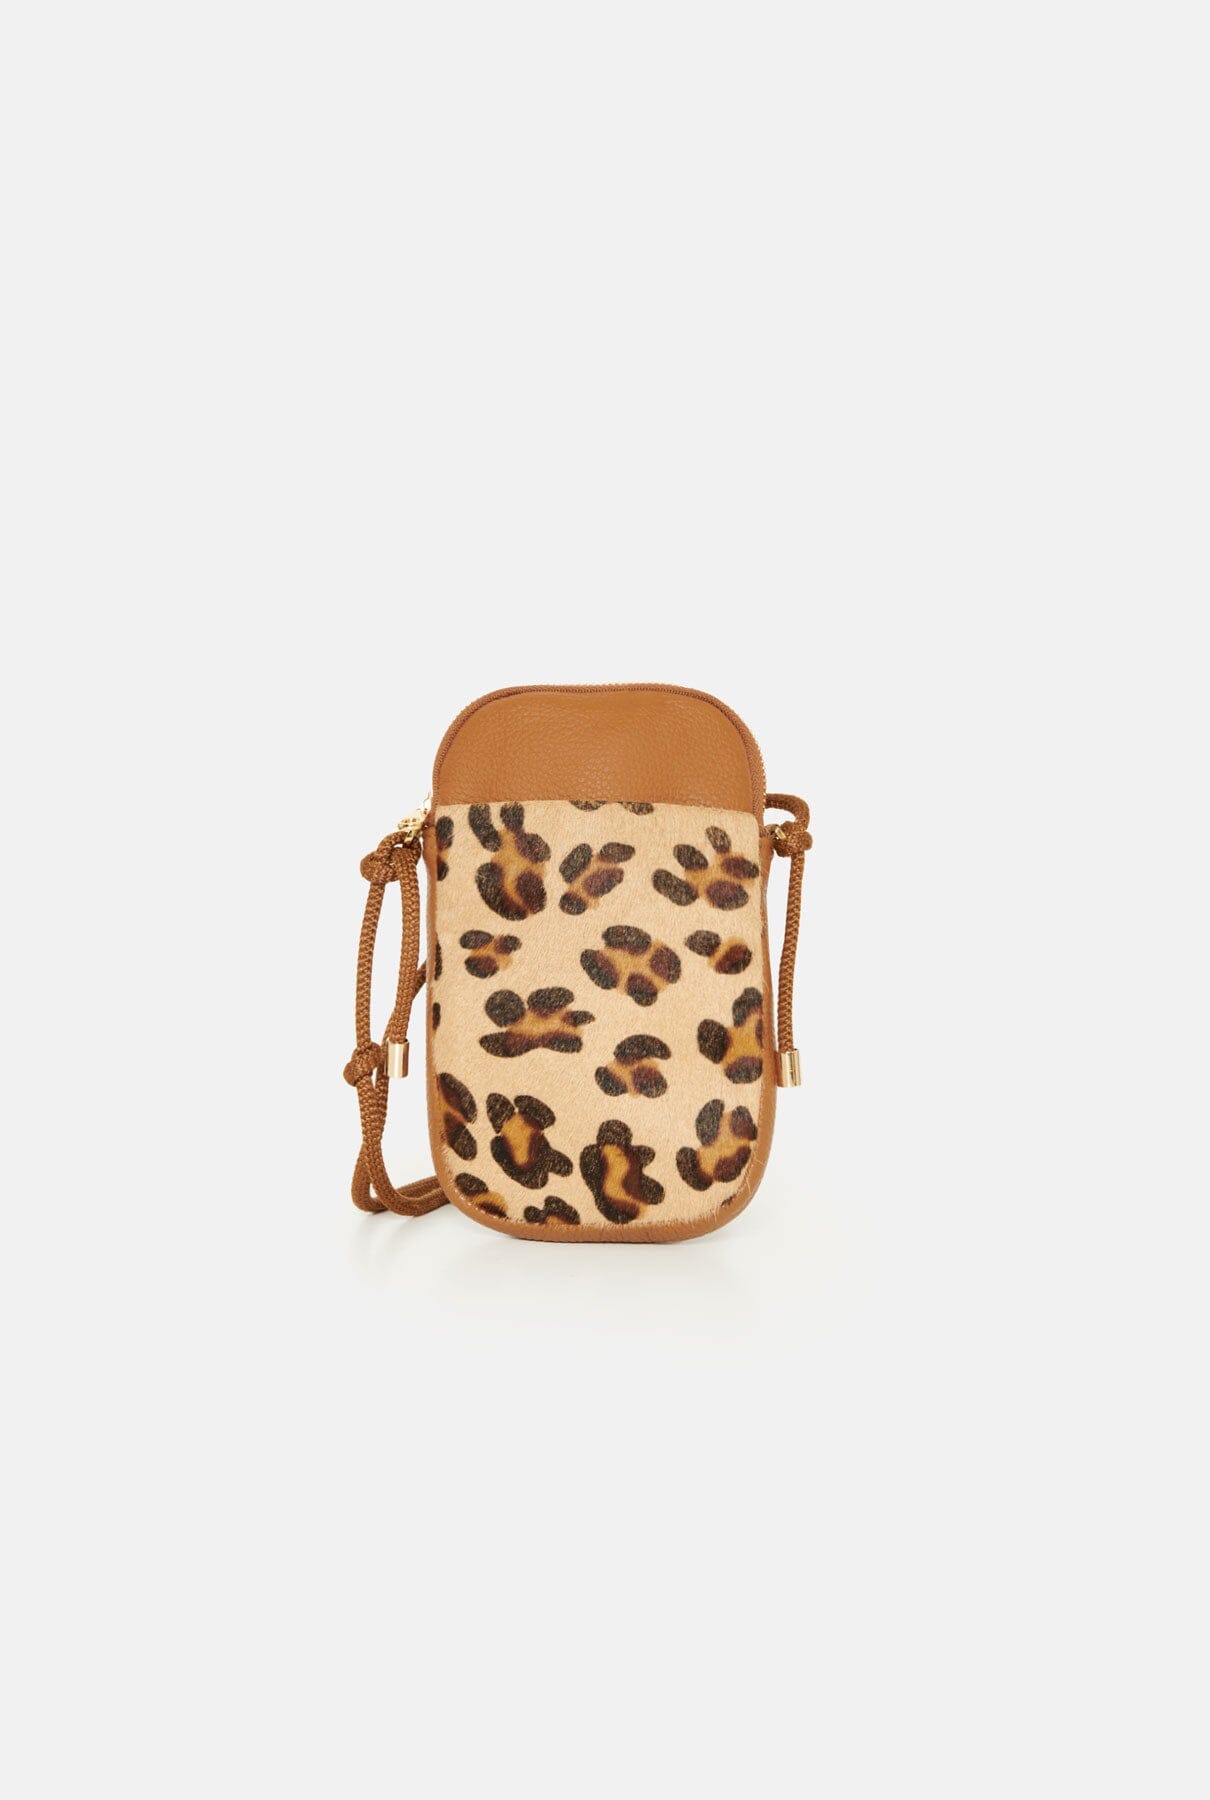 The Lore Bag Leo Collection Crossbody bags The Bag Lab 